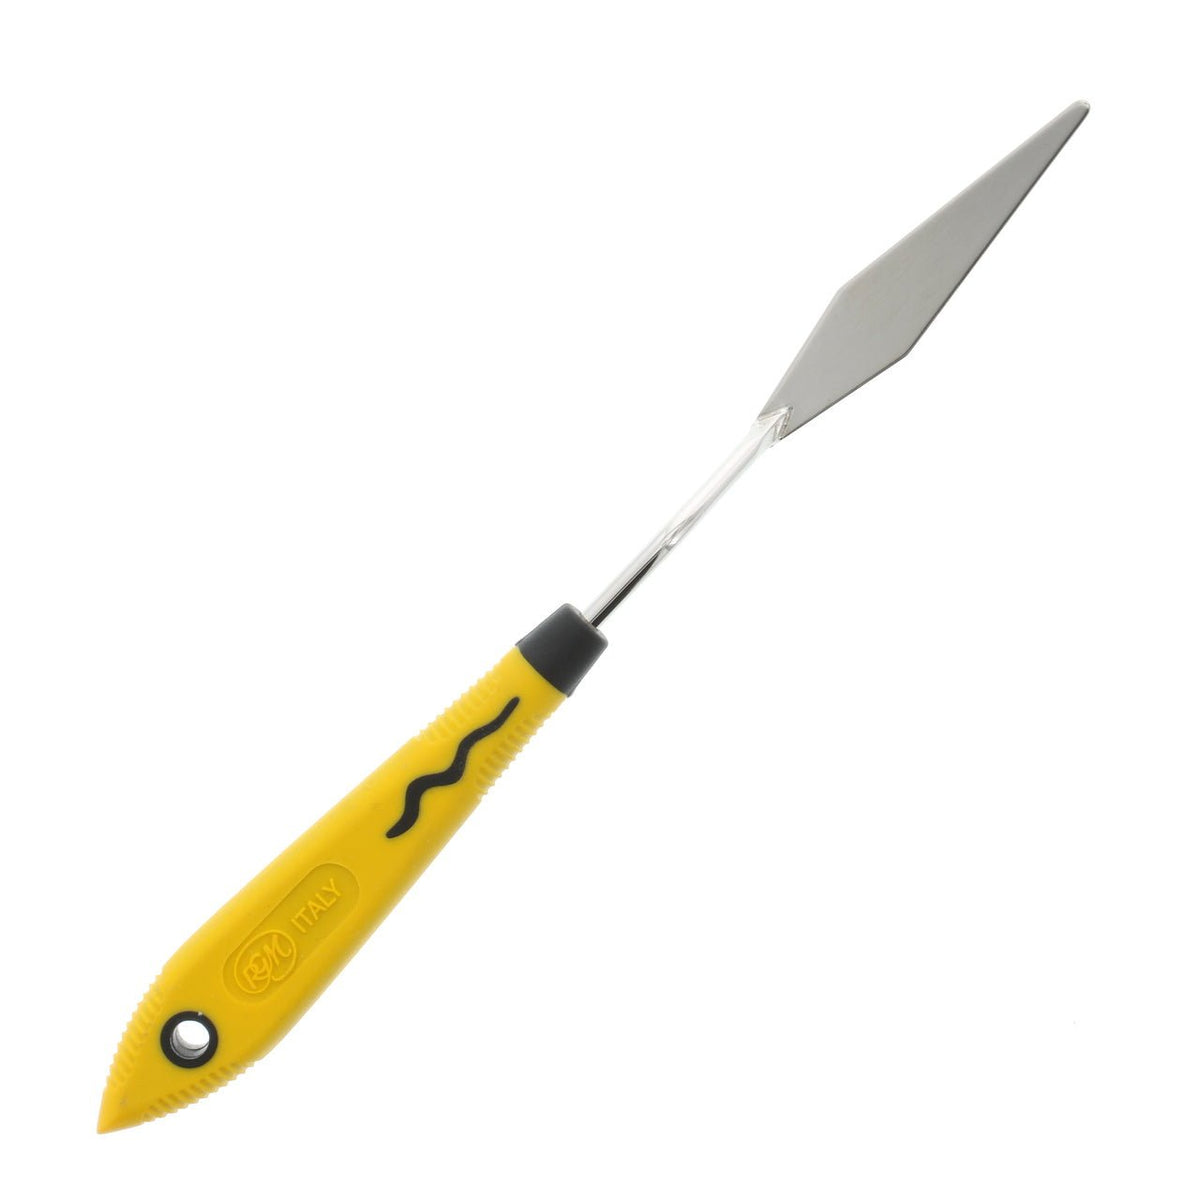 RGM Soft Grip Painting Knife #050 (Yellow Handle) - merriartist.com